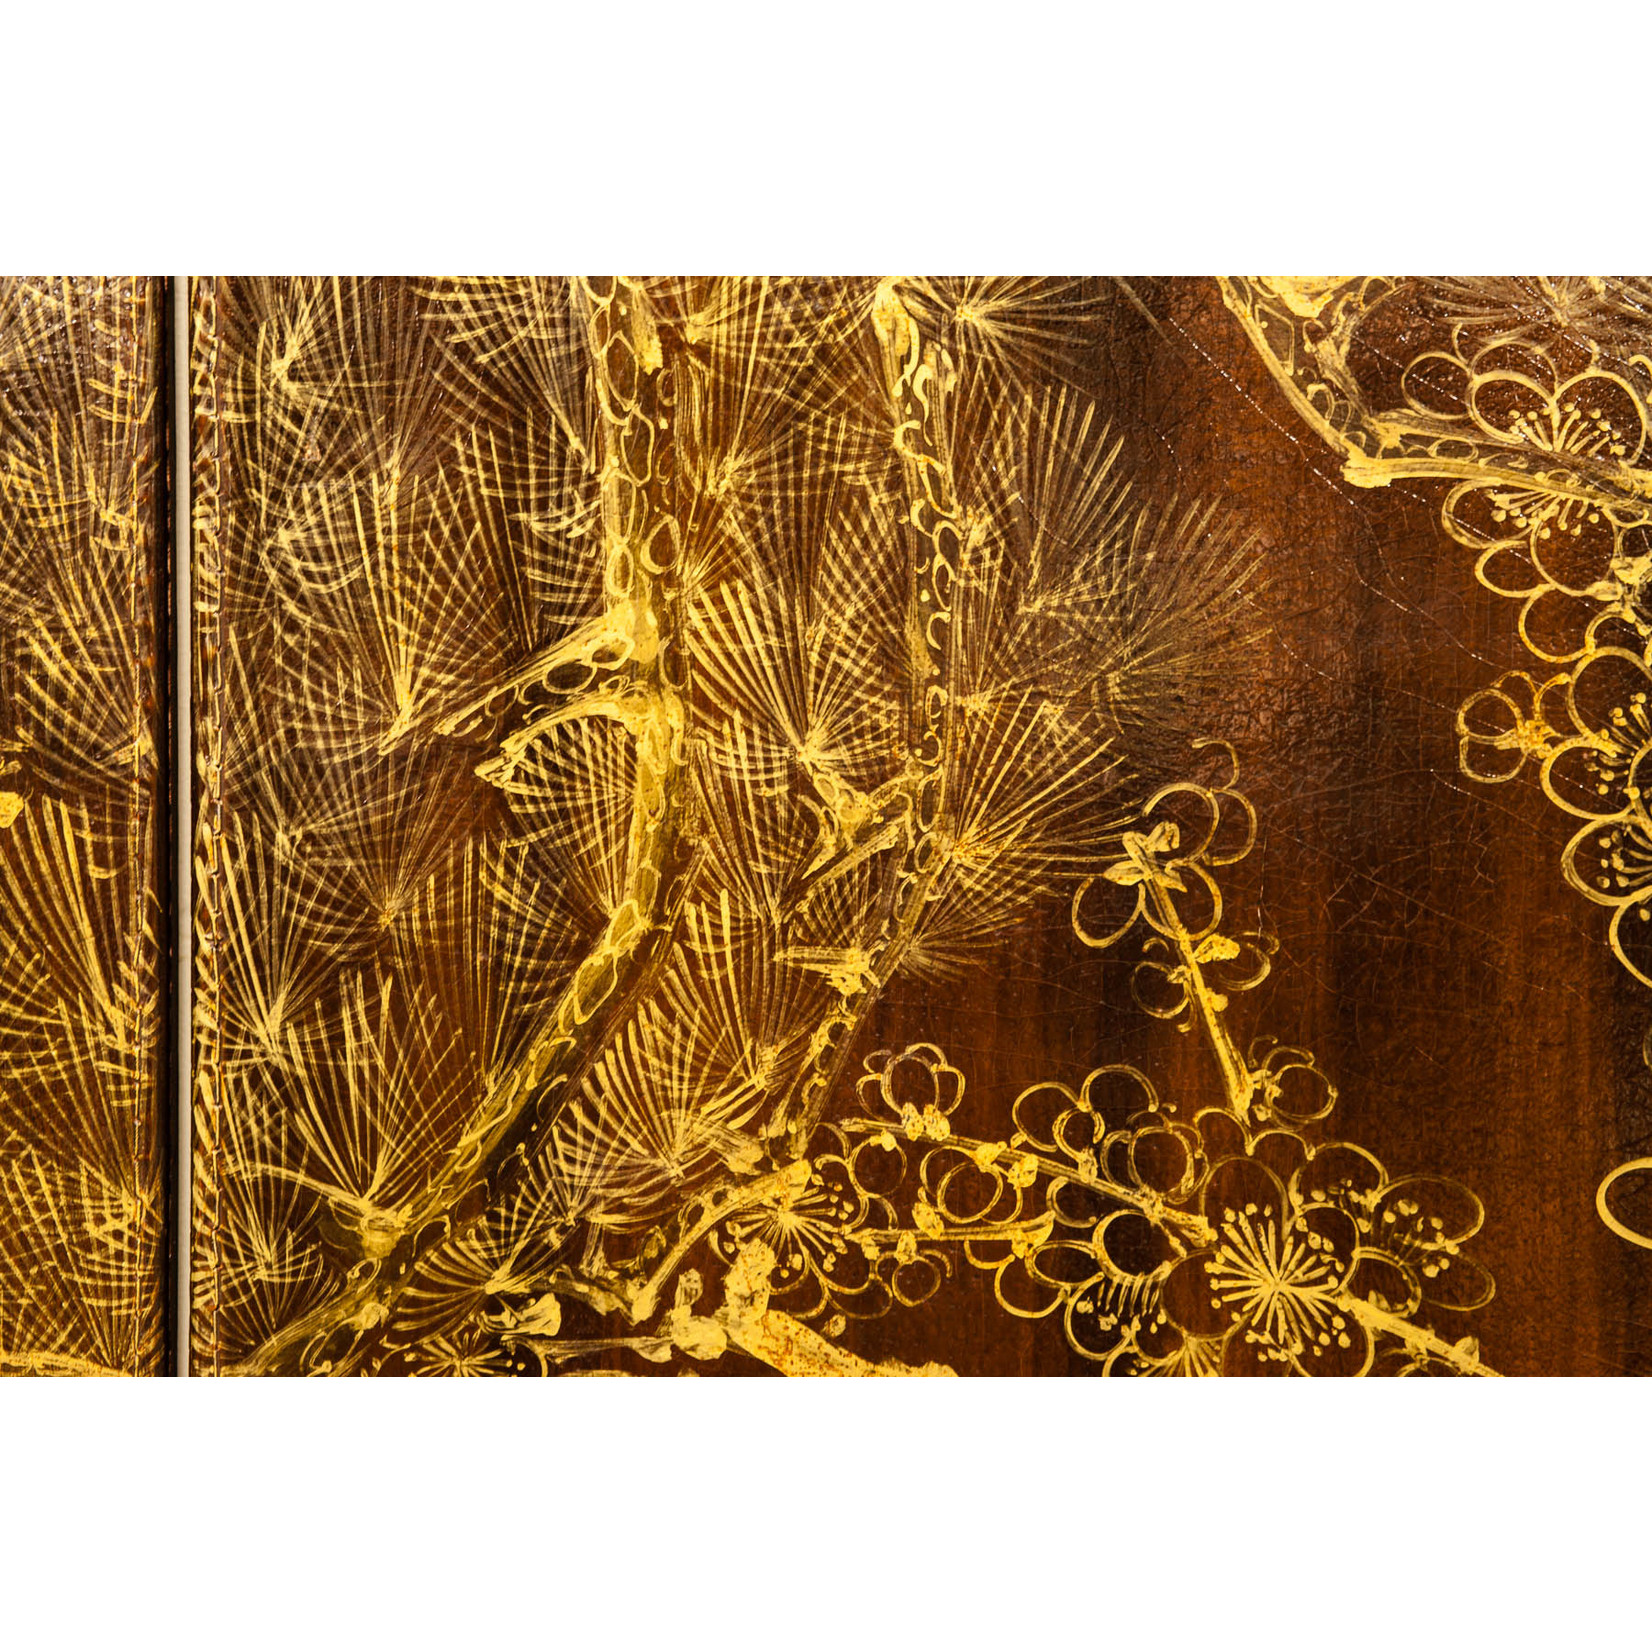 Lawrence & Scott Double-Sided Leather Wisteria & Bamboo Scene 6-Panel Room Divider Screen in Mahogany